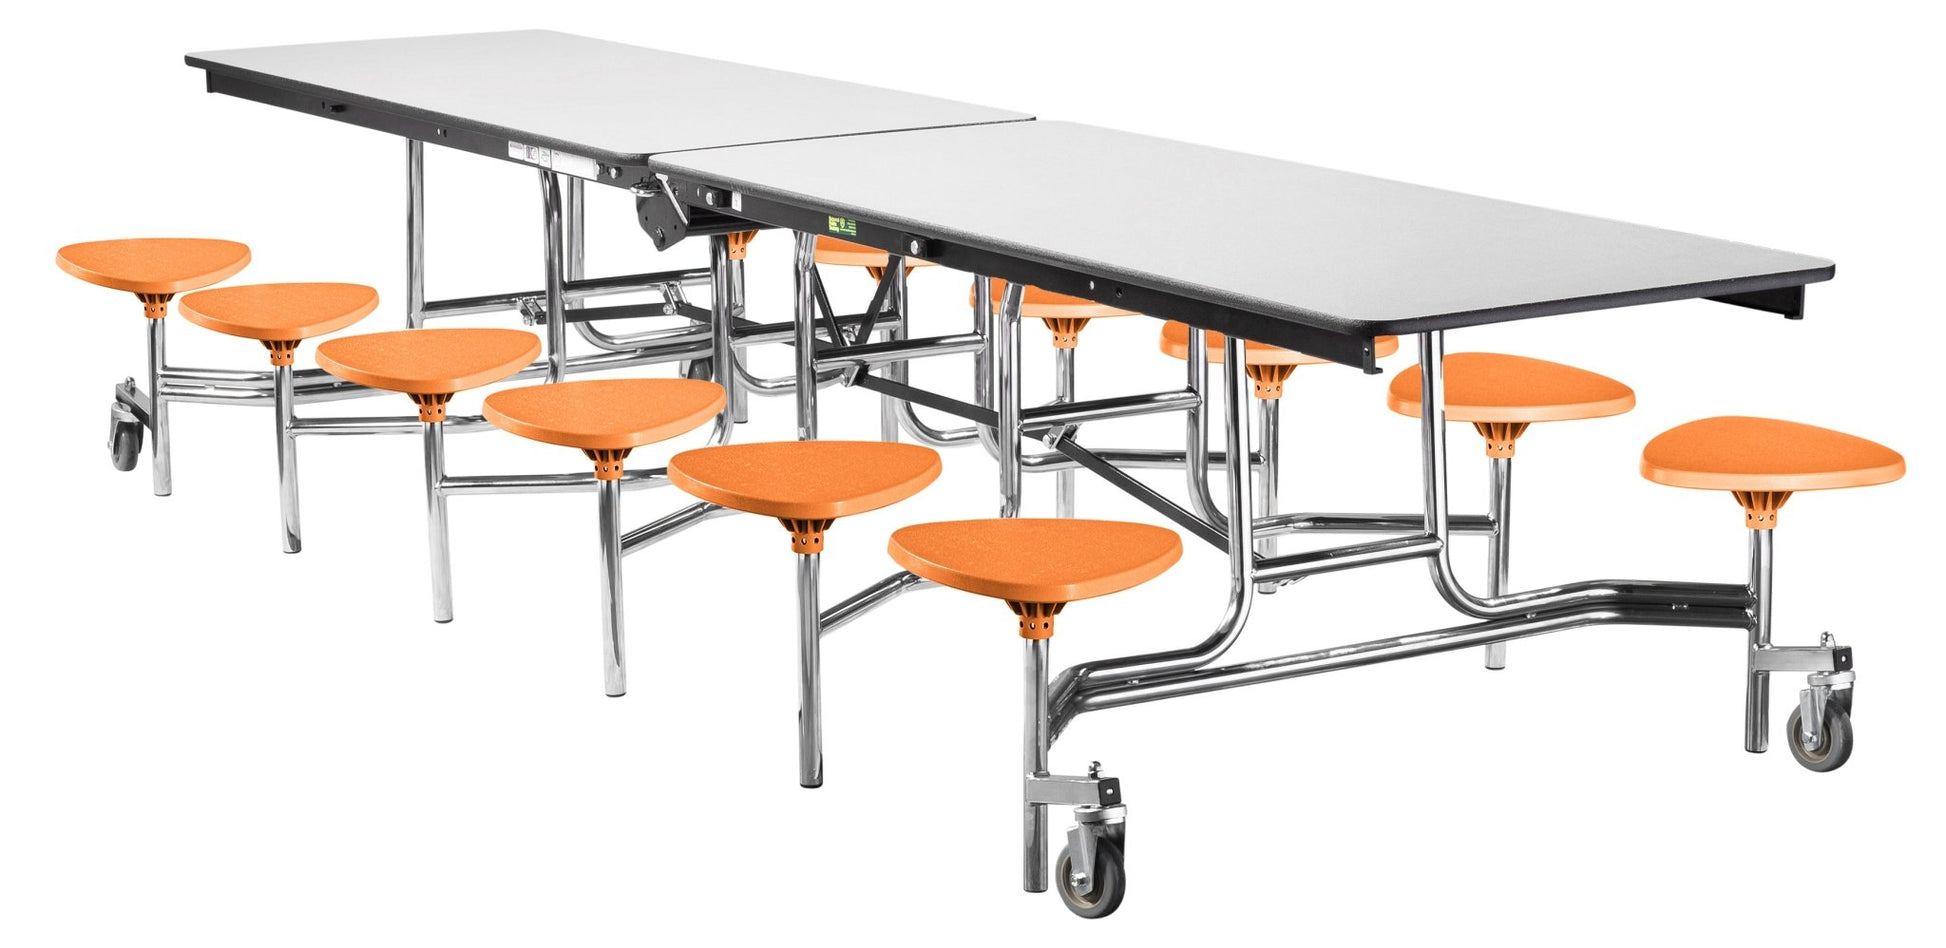 Mobile Cafeteria Lunchroom Stool Table - 30" W x 12' L - 12 Stools - Plywood Core - T-Molding Edge - Black Powdercoated Frame - SchoolOutlet